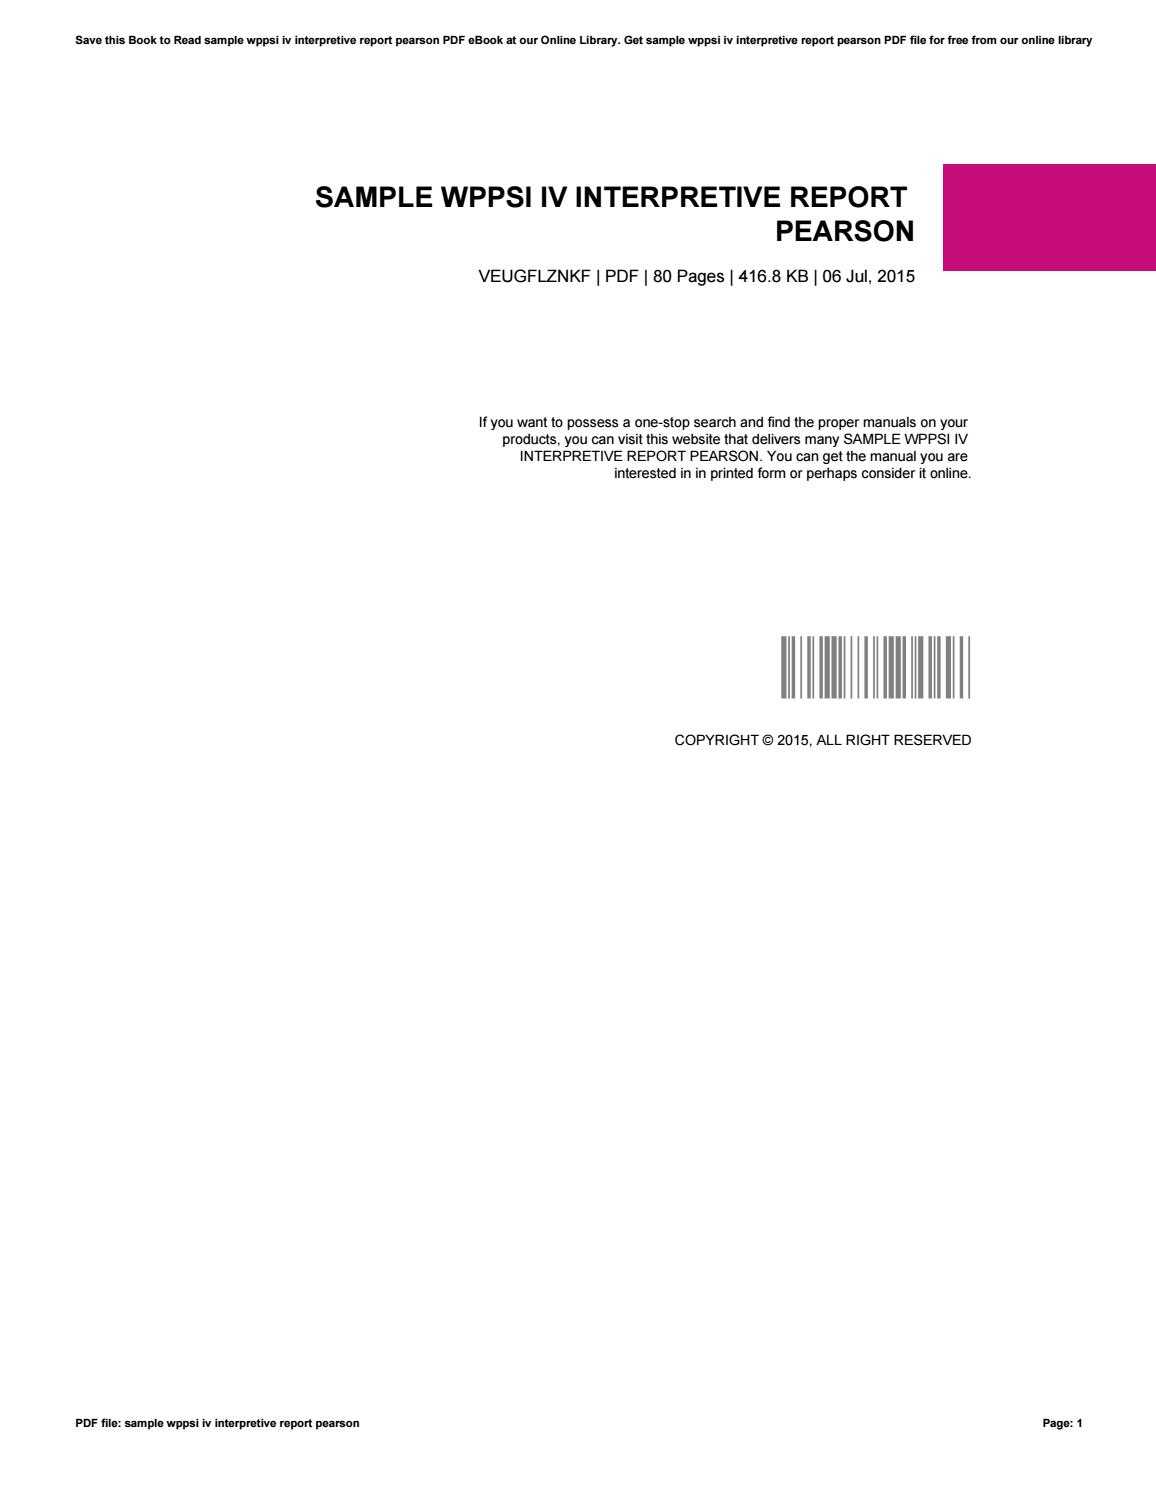 Sample Wppsi Iv Interpretive Report Pearson Within Wppsi Iv Report Template